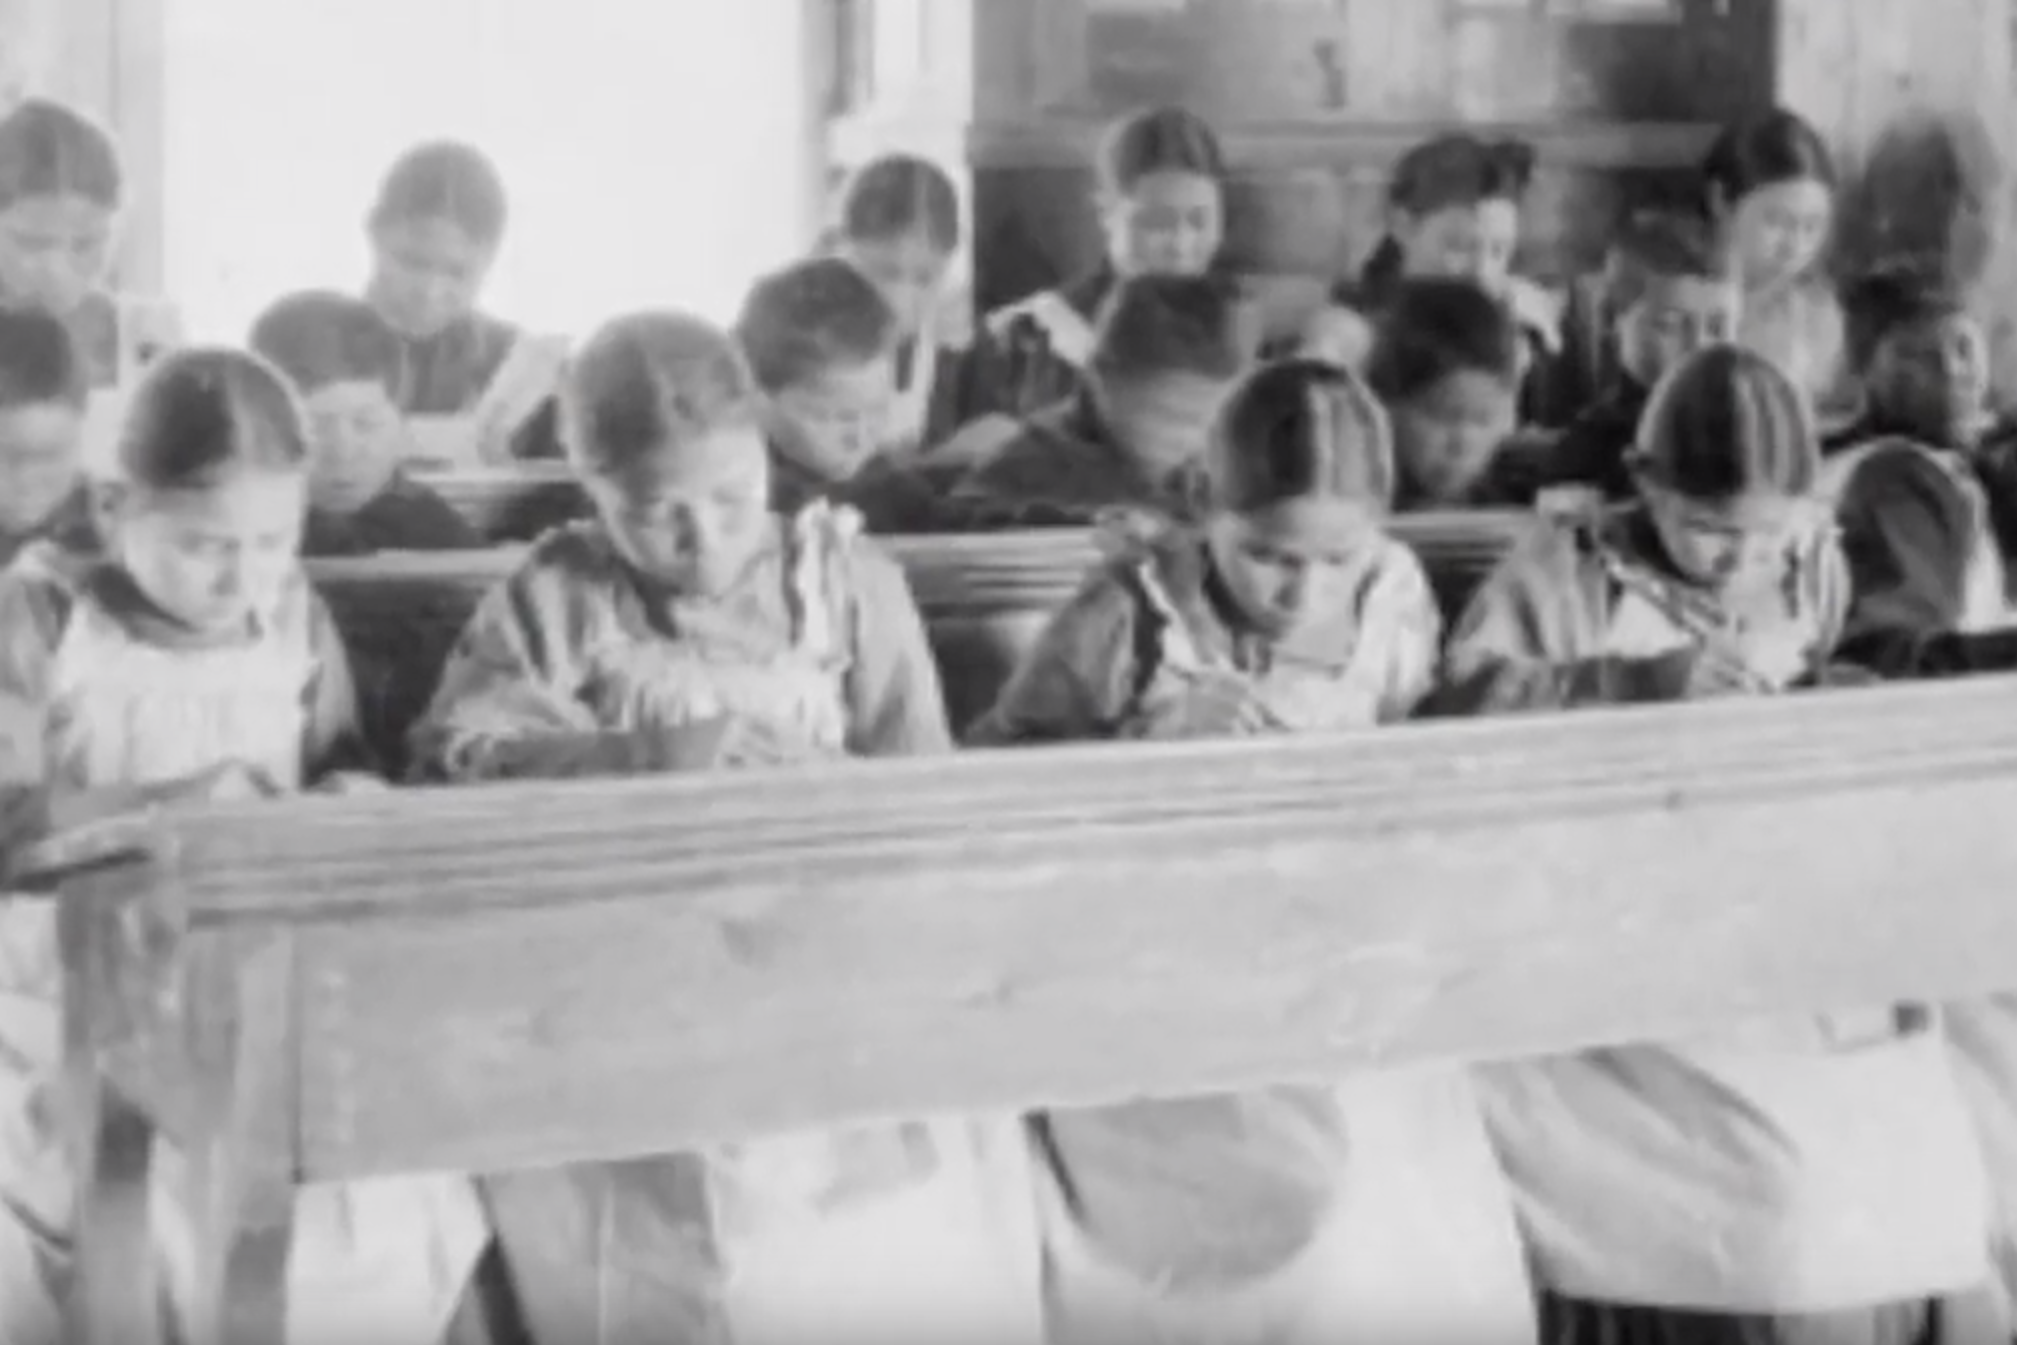 Ininiwag Dibaajimowag: Greg McIvor – Residential School: A Learning and Discovery Story